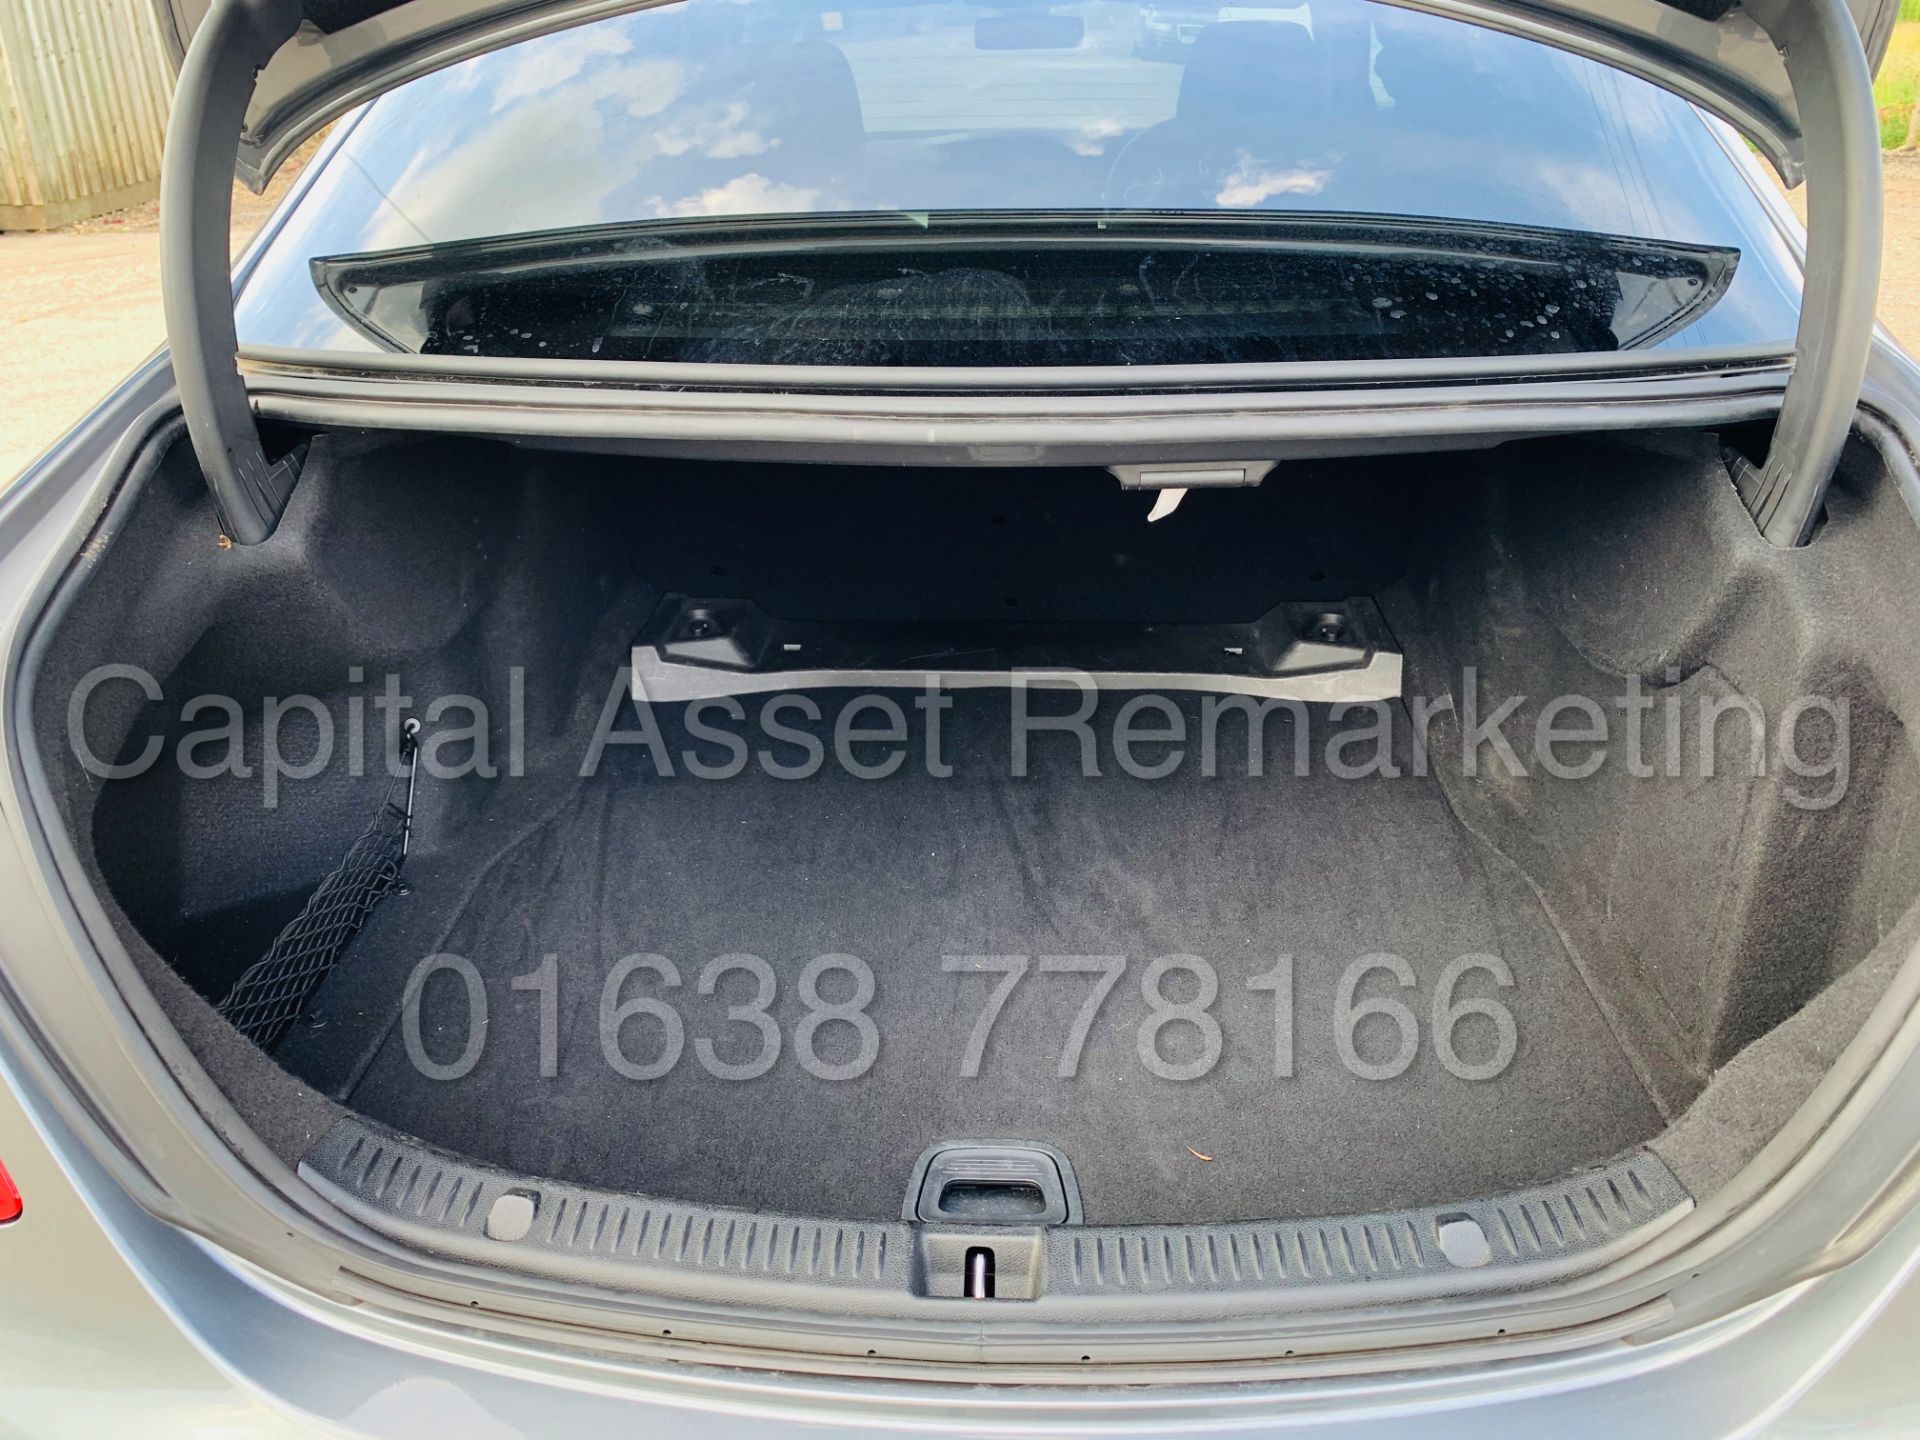 (On Sale) MERCEDES-BENZ E220d *SALOON* (2018 - NEW MODEL) '9G TRONIC AUTO - LEATHER - SAT NAV' - Image 27 of 50